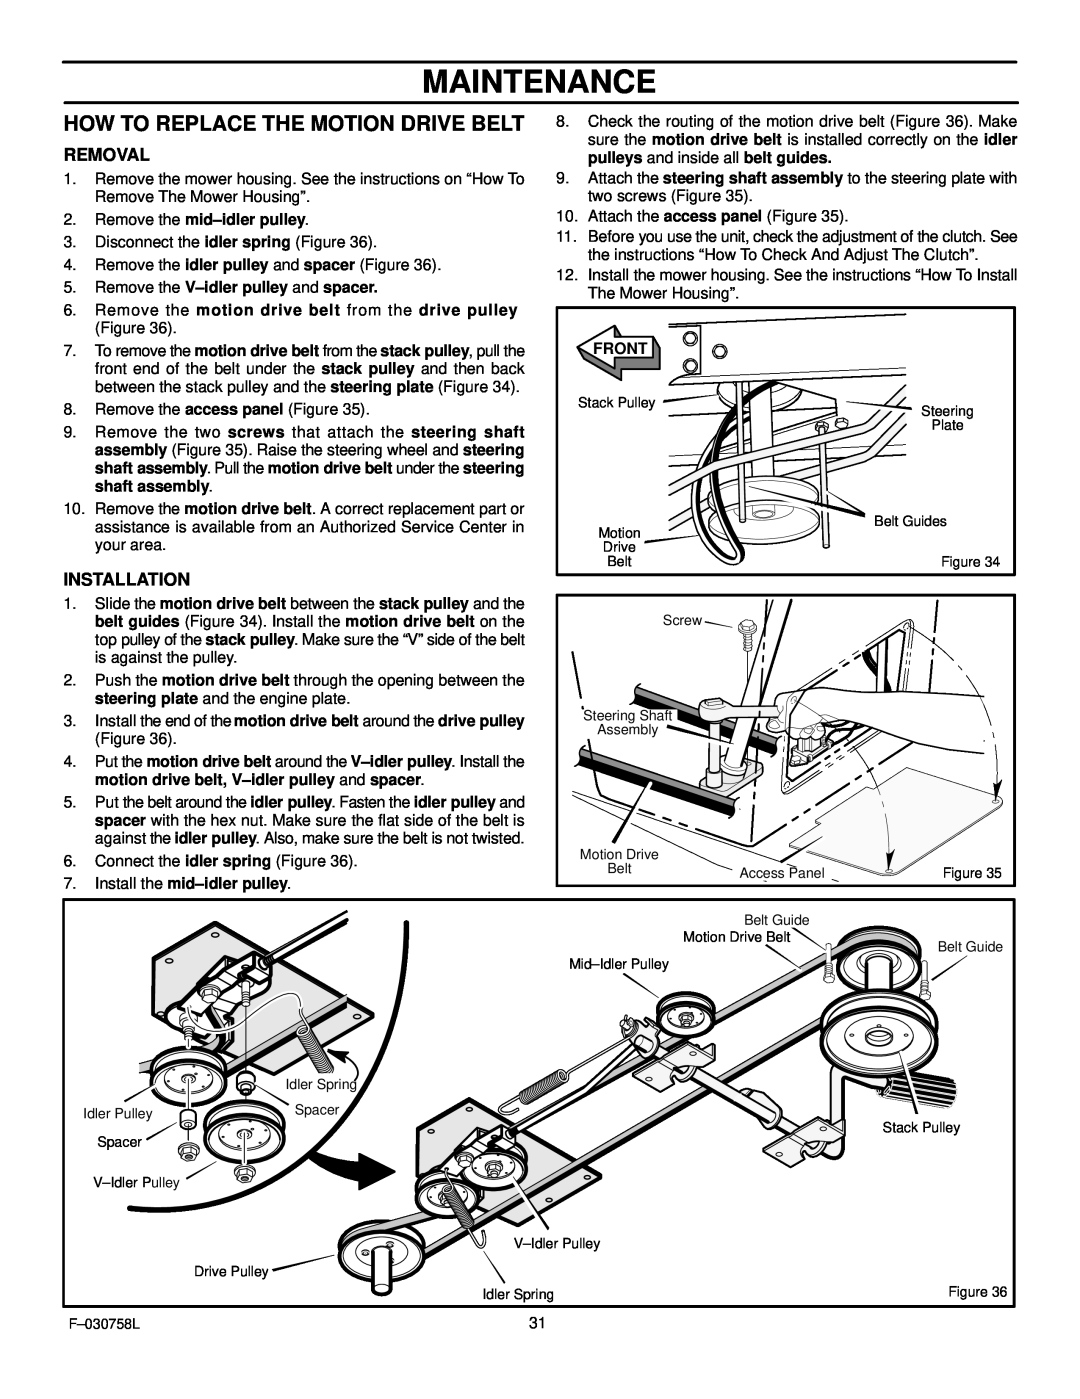 Murray 465609x24A manual Maintenance, How To Replace The Motion Drive Belt, Removal, Installation 